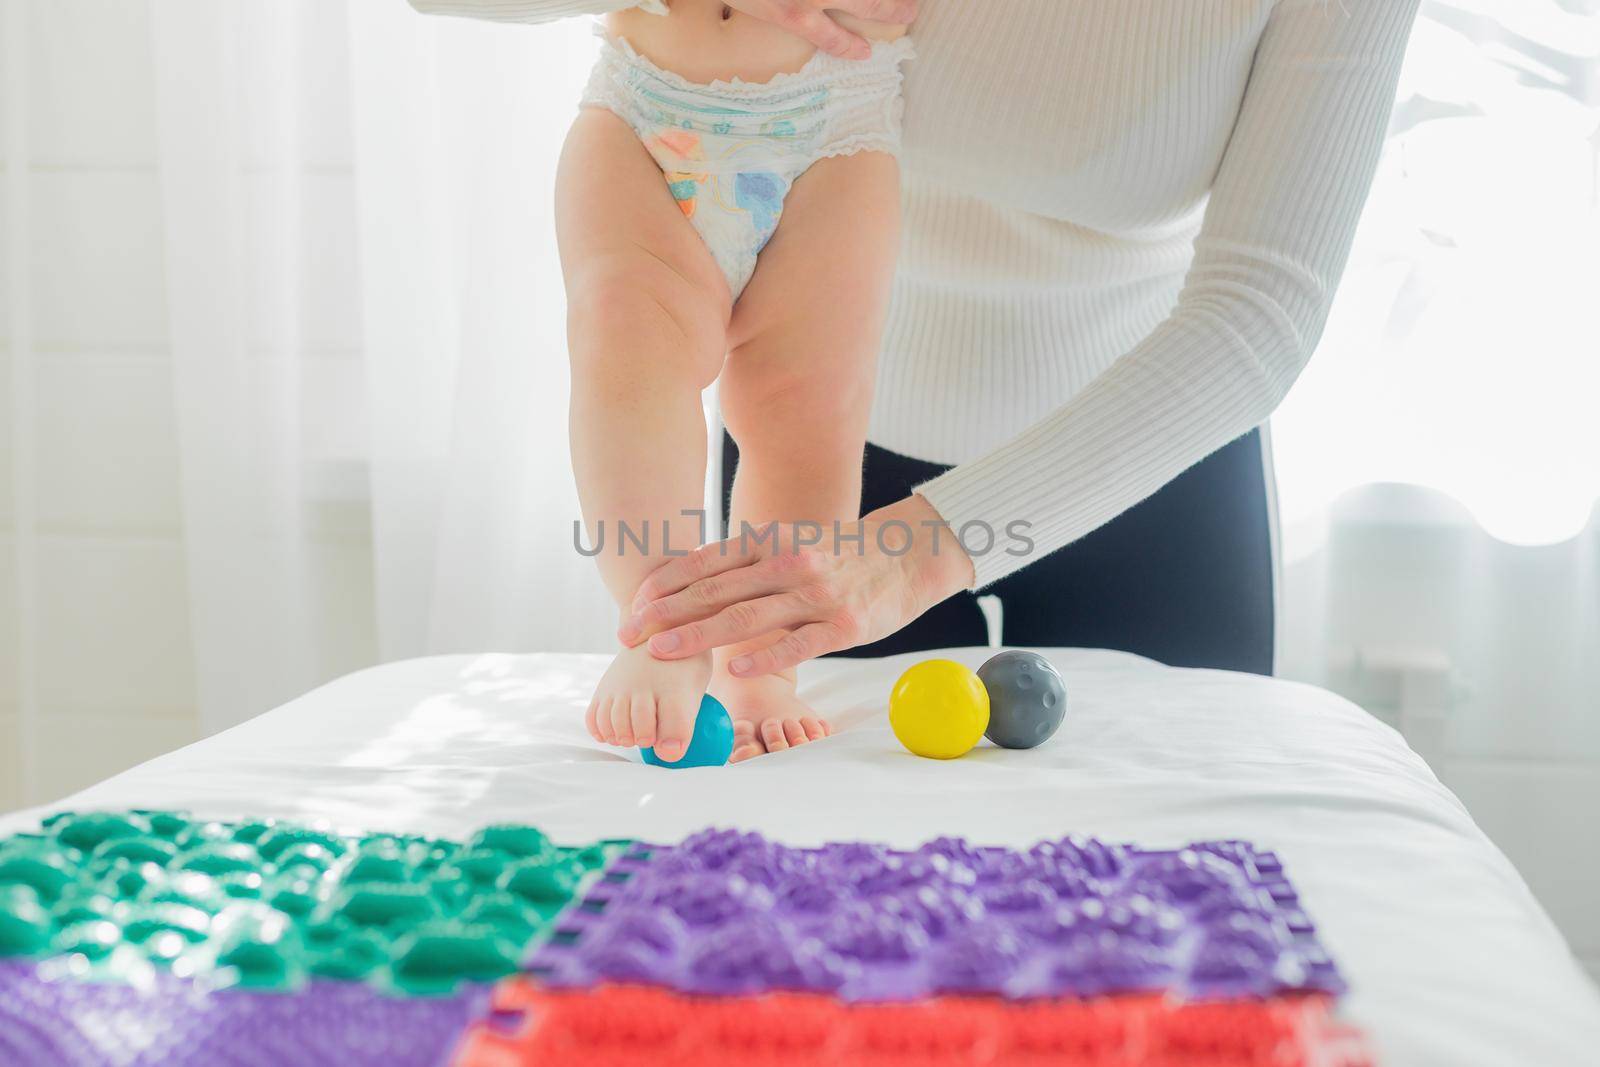 Mom gives the baby a foot massage with massage balls. by Yurich32